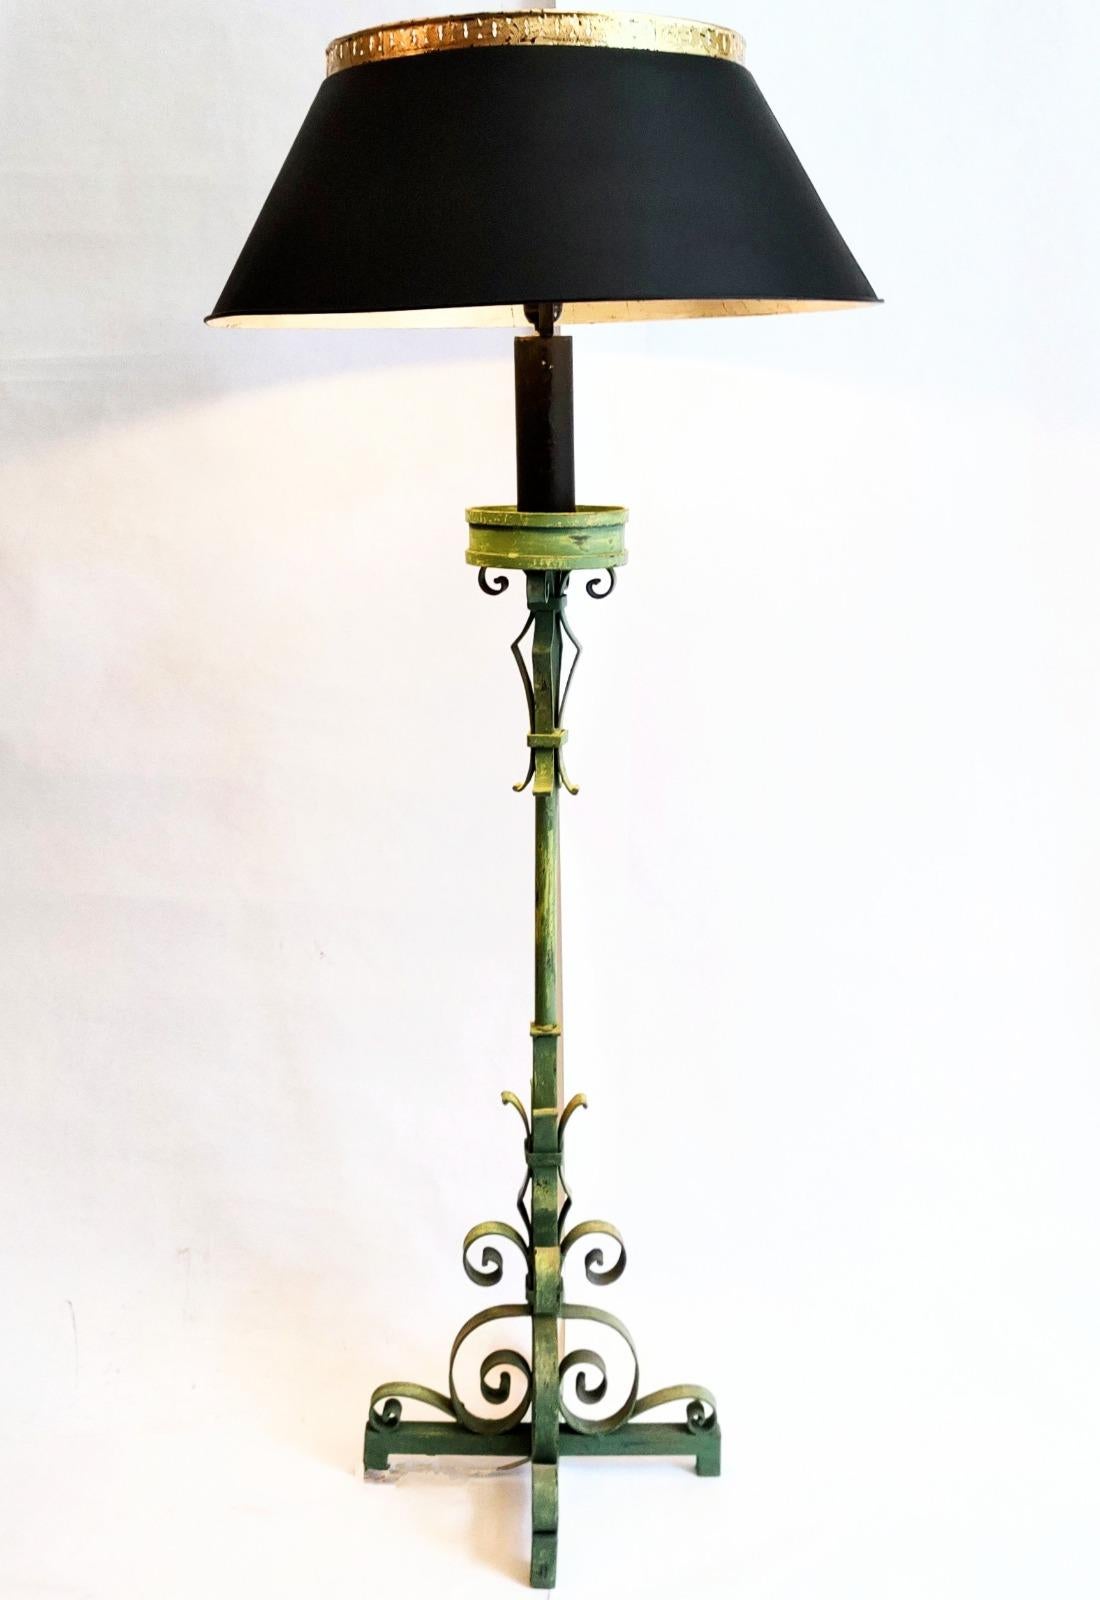 Wrought iron floor lamp with intricated hand-forged forms on a base with four sturdy legs. Keeps its original cactus-green color with a natural patina and signs of use and wear. Comes with a large metallic lampshade recently painted matte black on